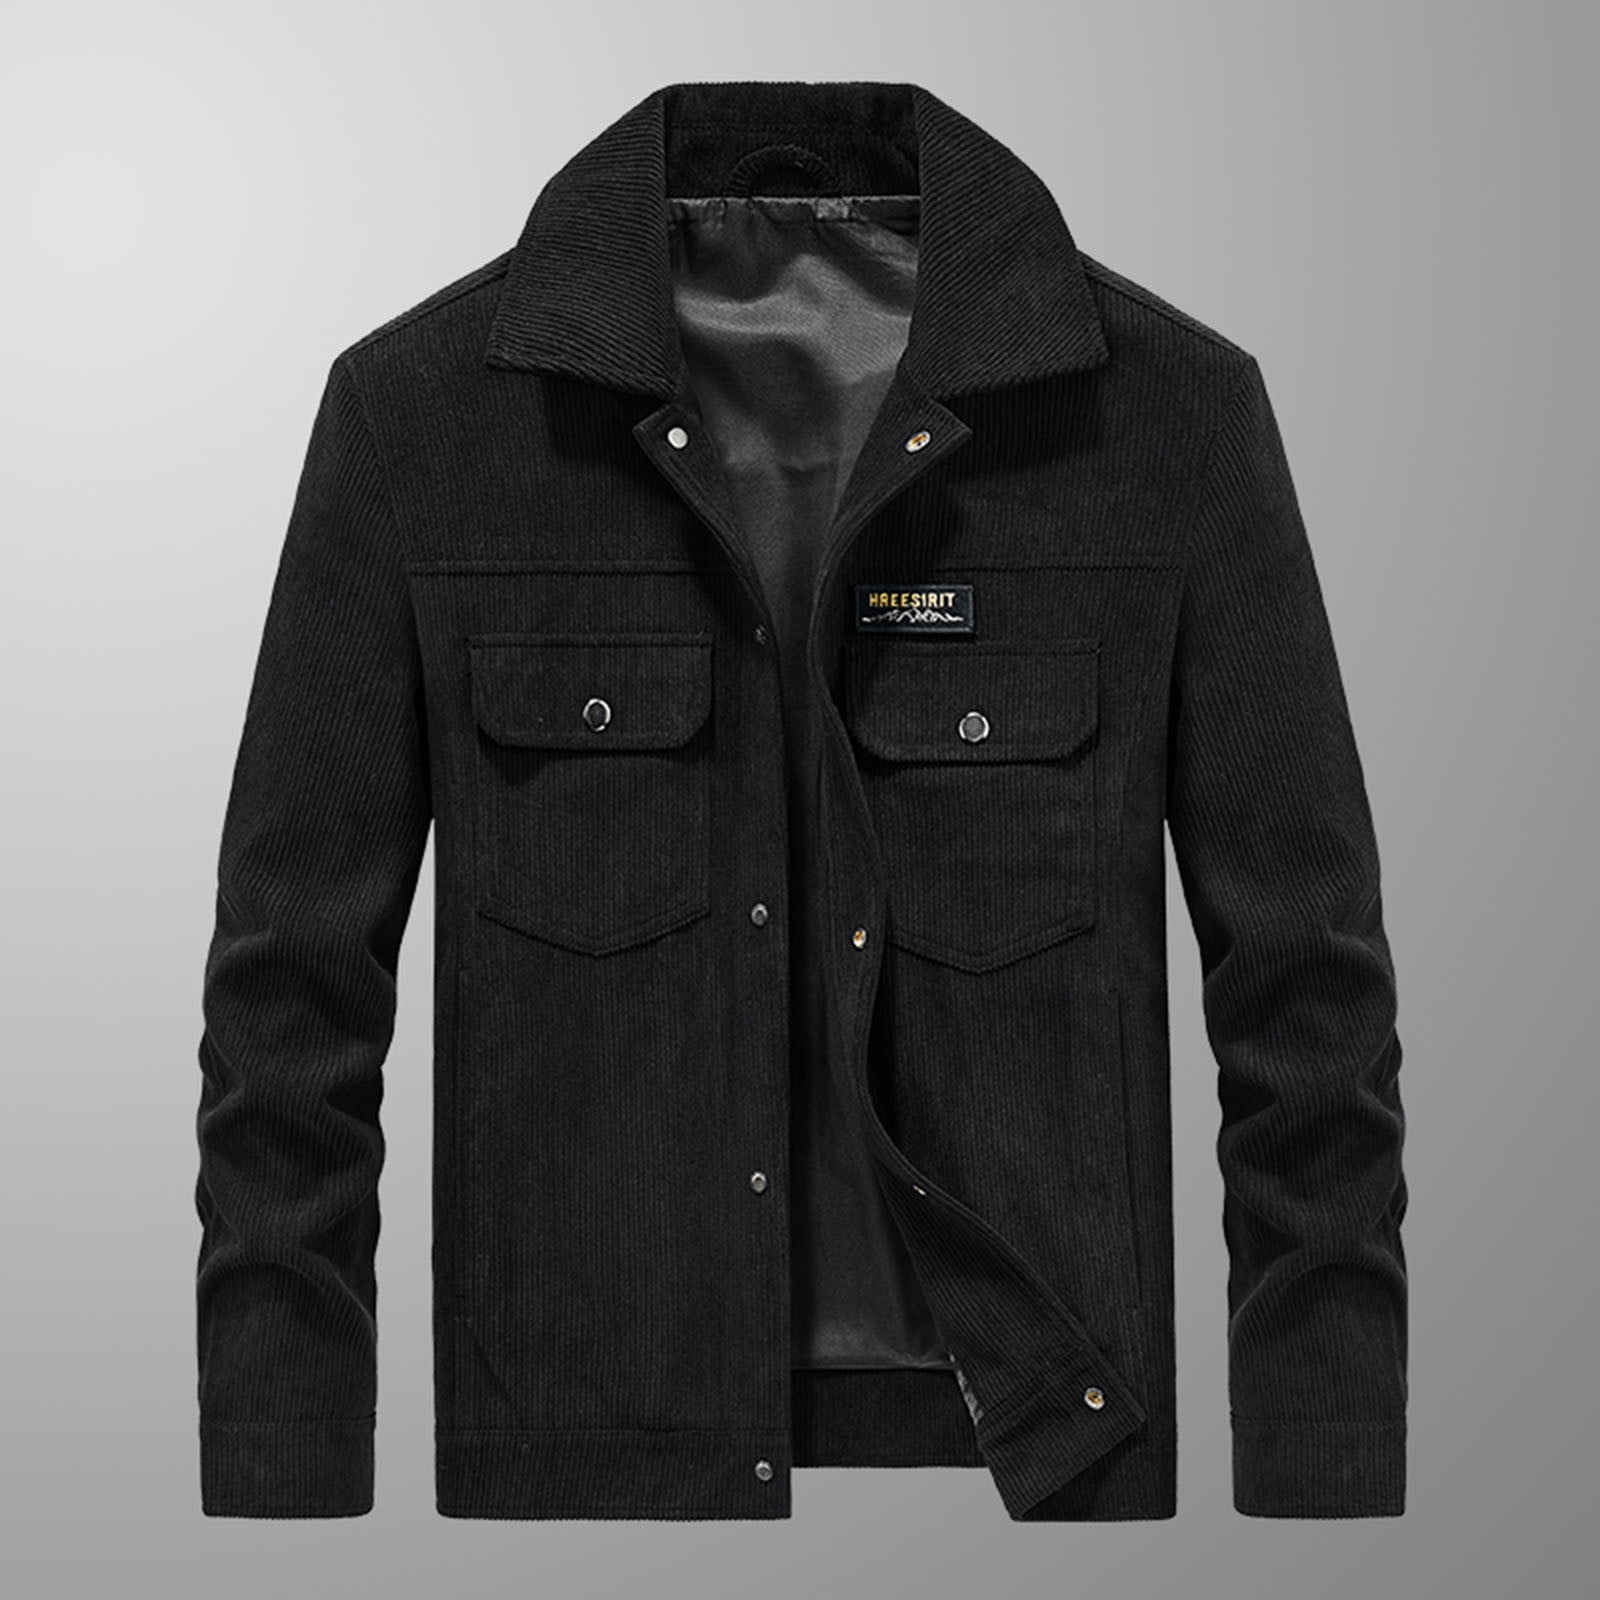 Cargo & Half Cargo Jackets at Best Prices Online - 18 products on sale |  FASHIOLA.in